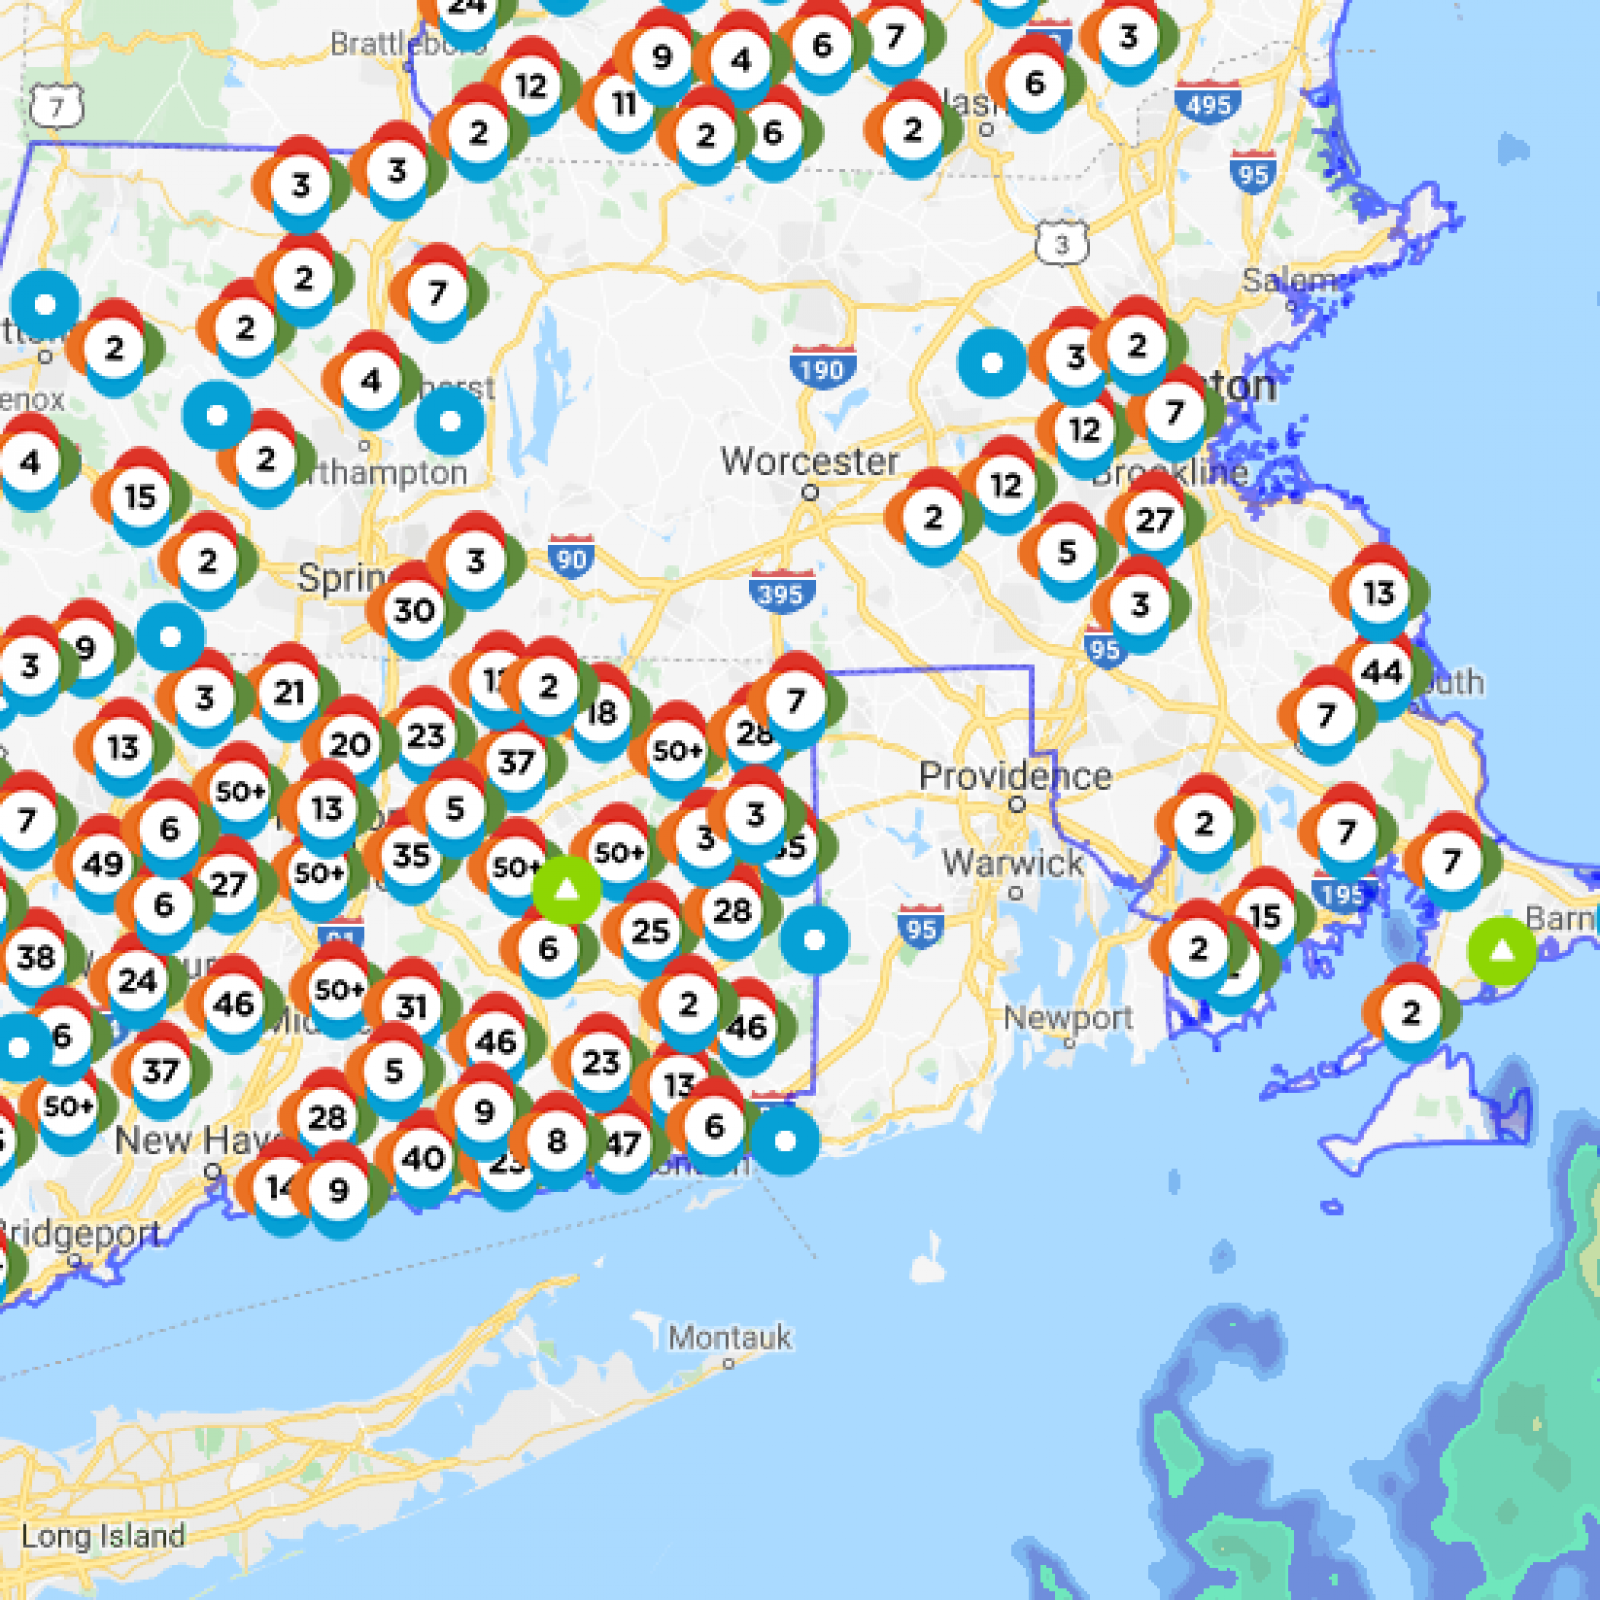 Eversource Outage Map 82 000 Connecticut Customers Lose Power